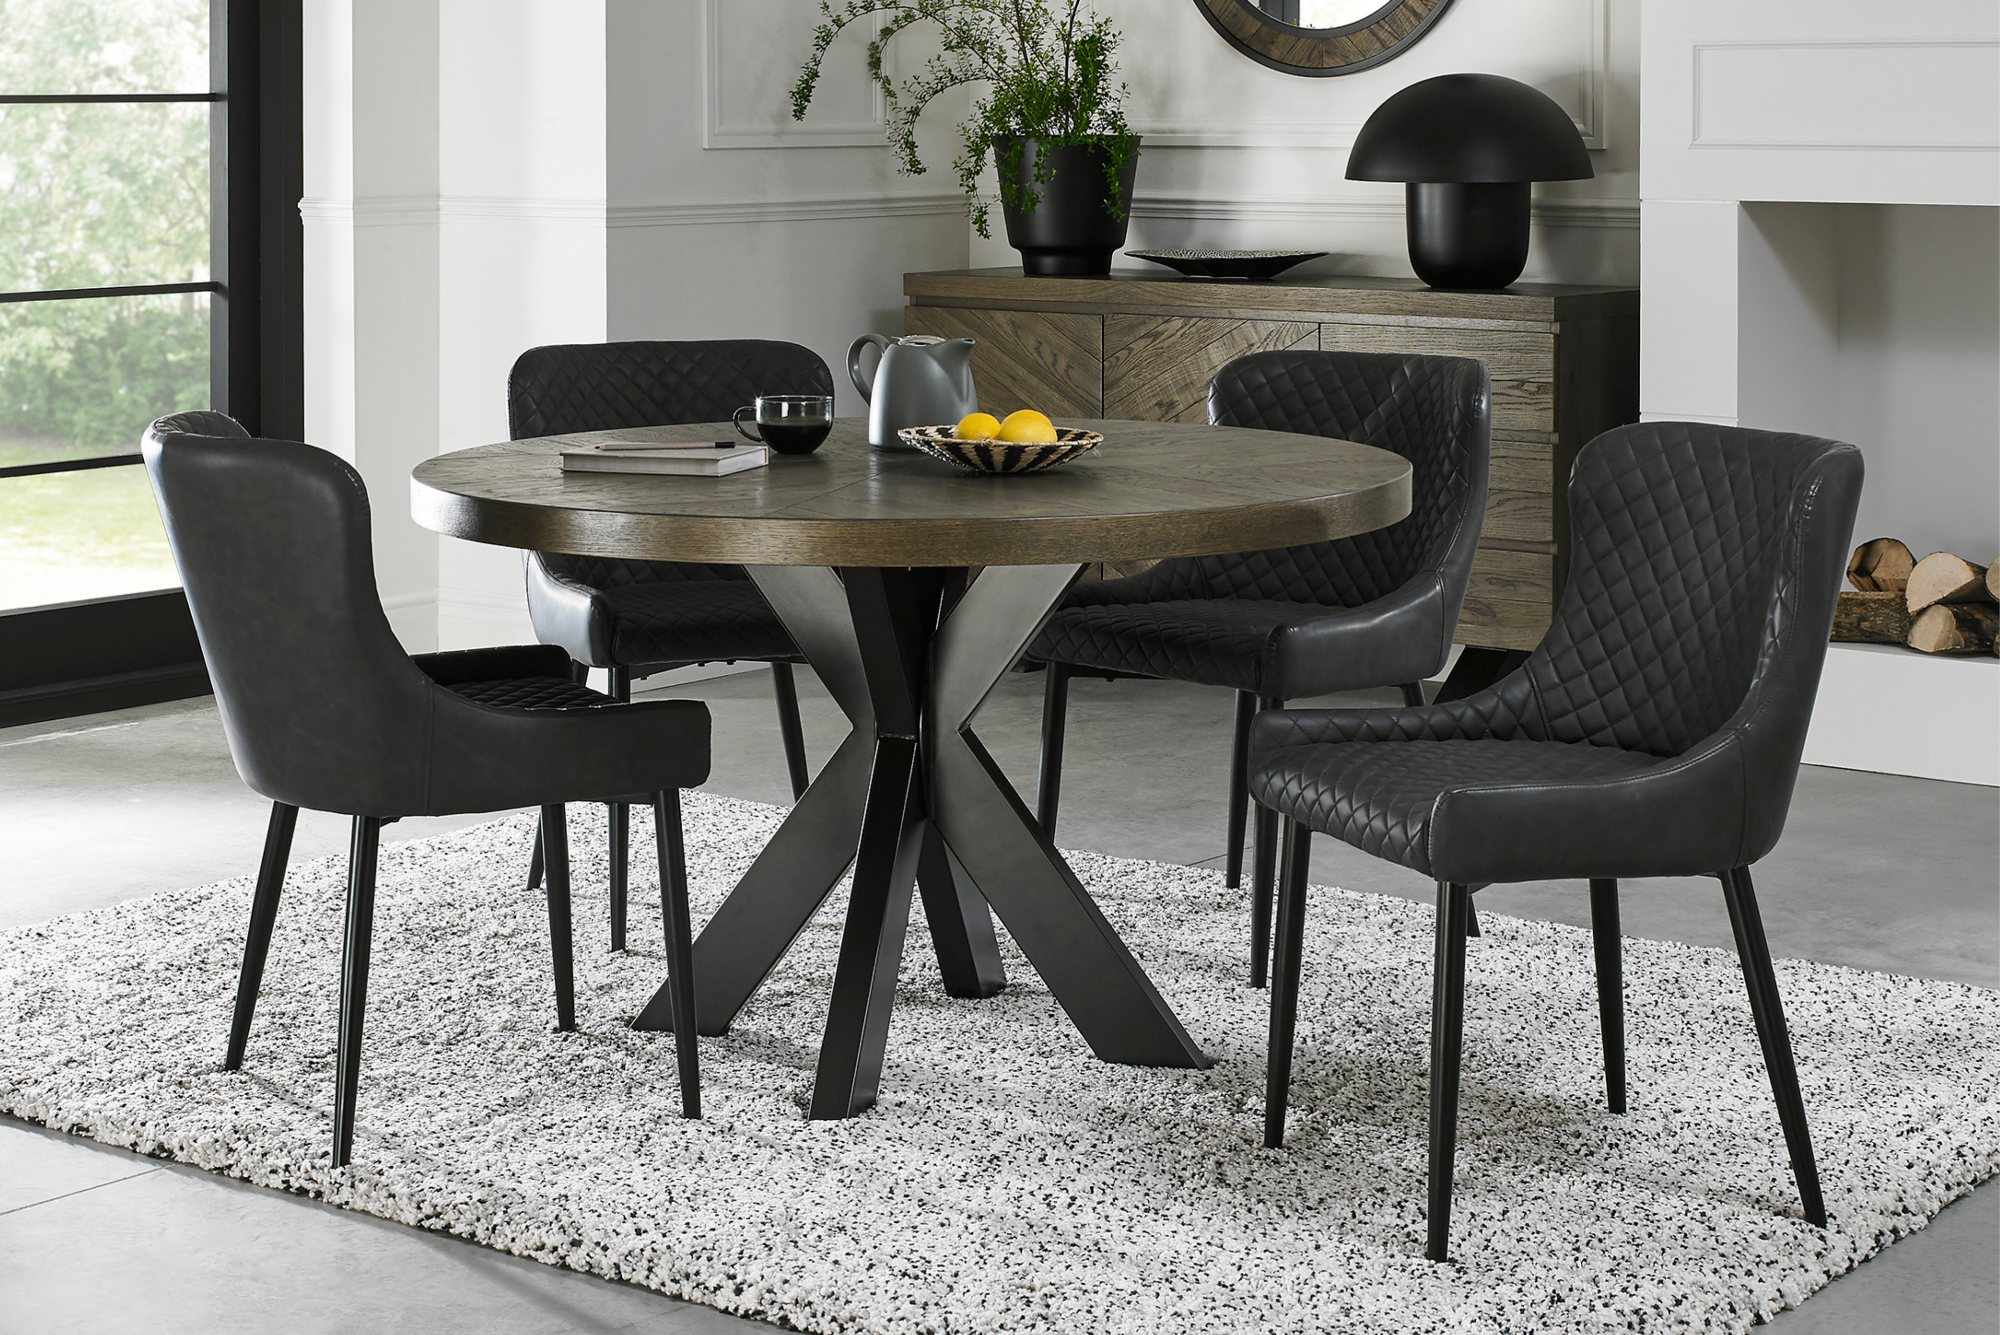 Home Origins Bosco fumed oak 4 seater dining table with 4 Cezanne chairs- dark grey faux leather fabric